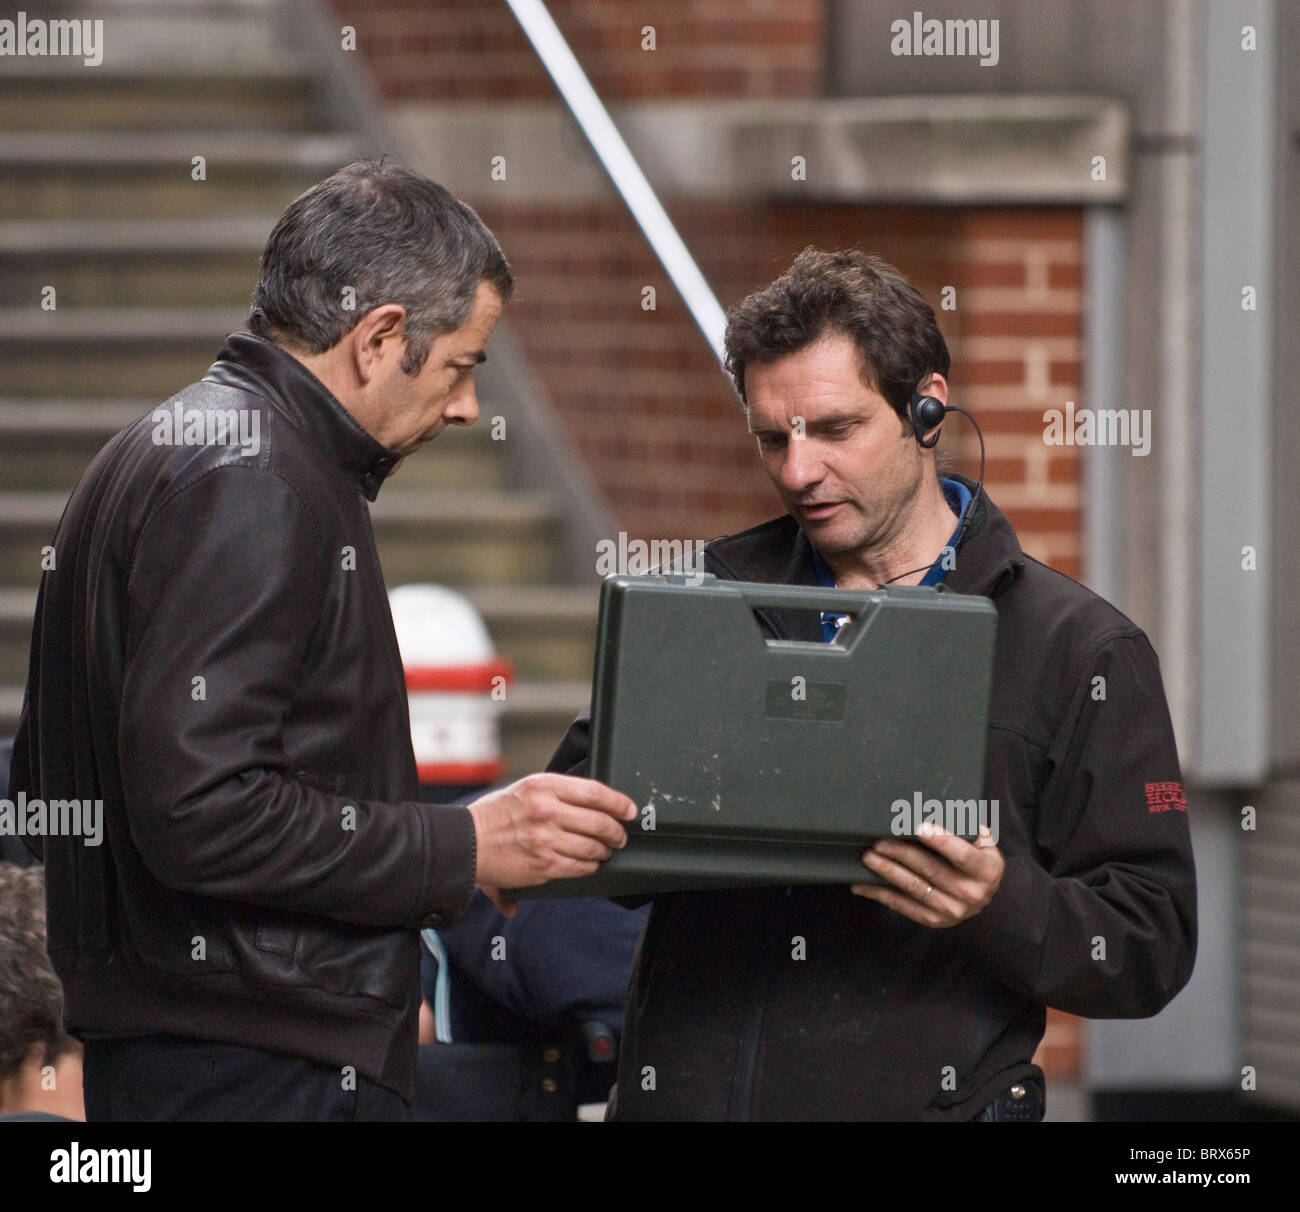 Rowan Atkinson discussion with a technician on set of Johnny English Reborn 2, in Pilgrim Street, EC4, City of London. Stock Photo